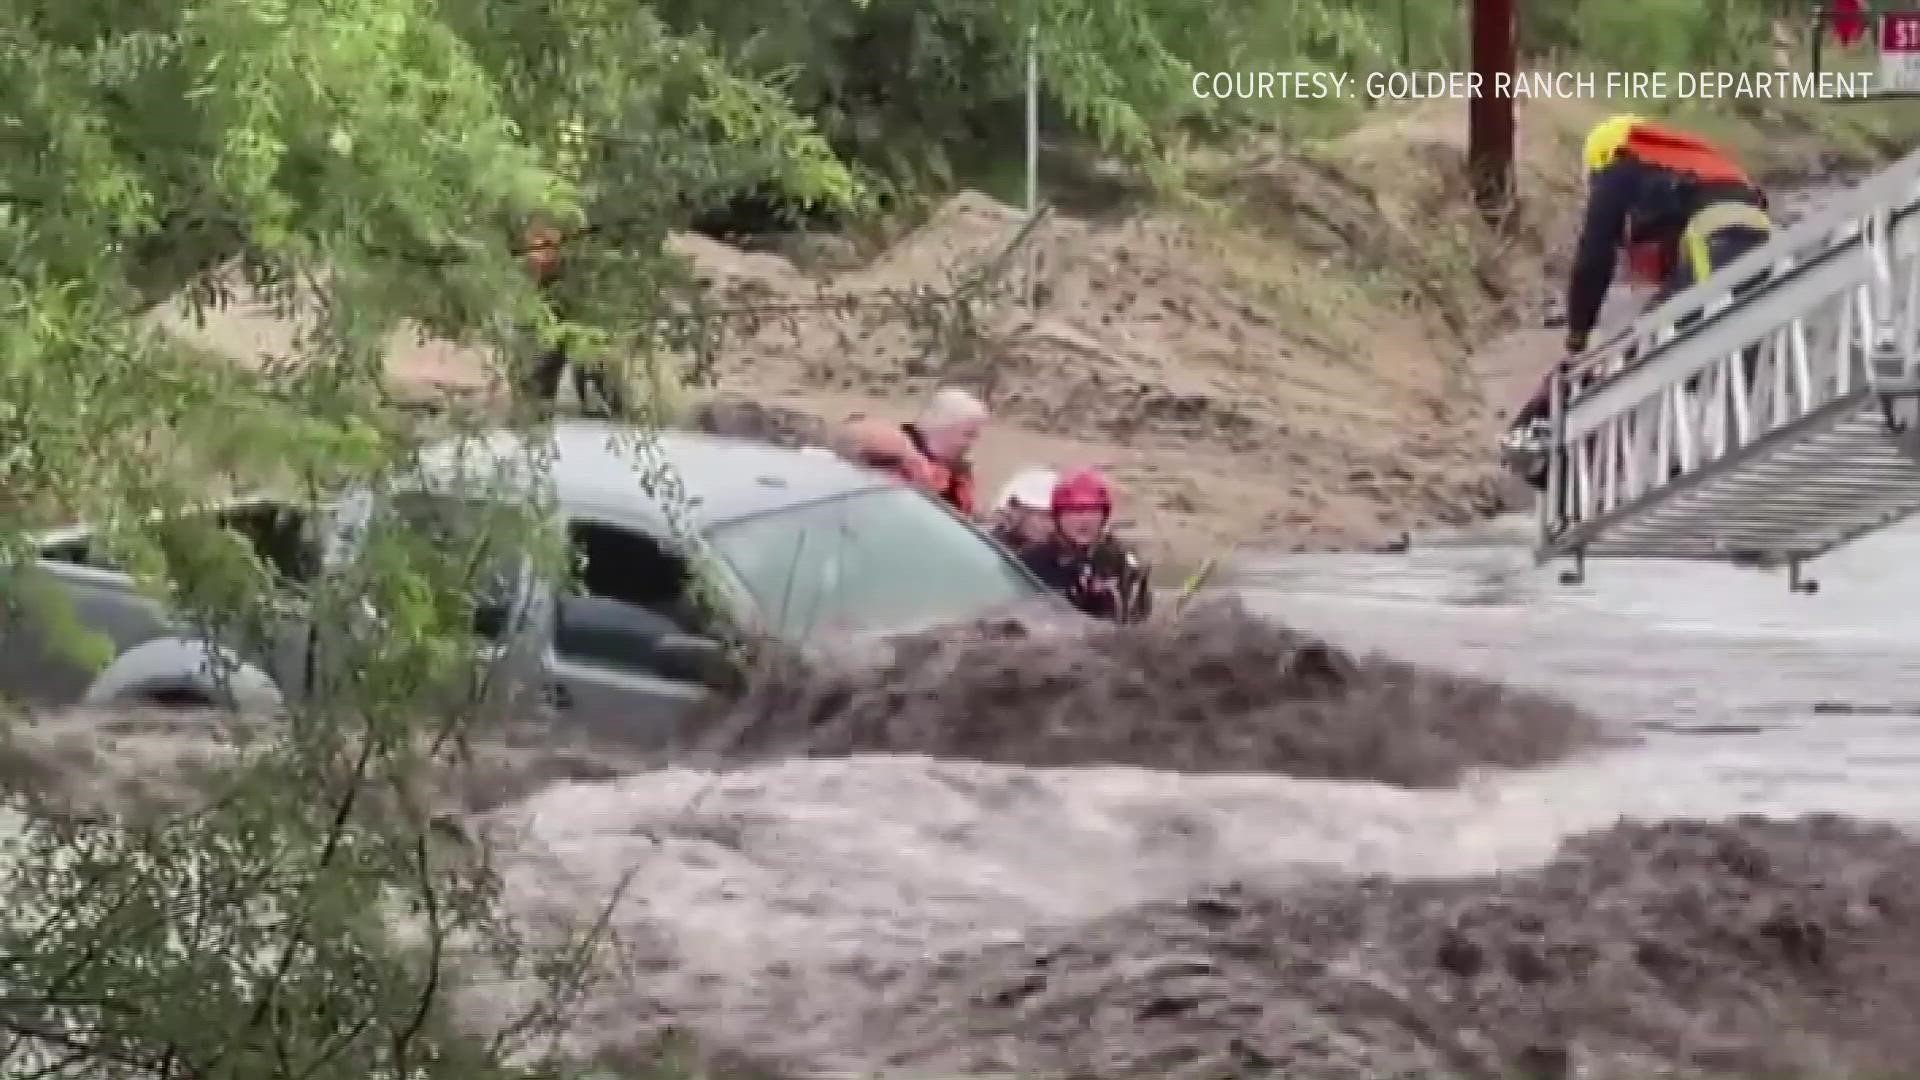 Watch how Golder Ranch fire crews rescued three people from their car during a flash flood near Tucson on Aug. 10, 2021.